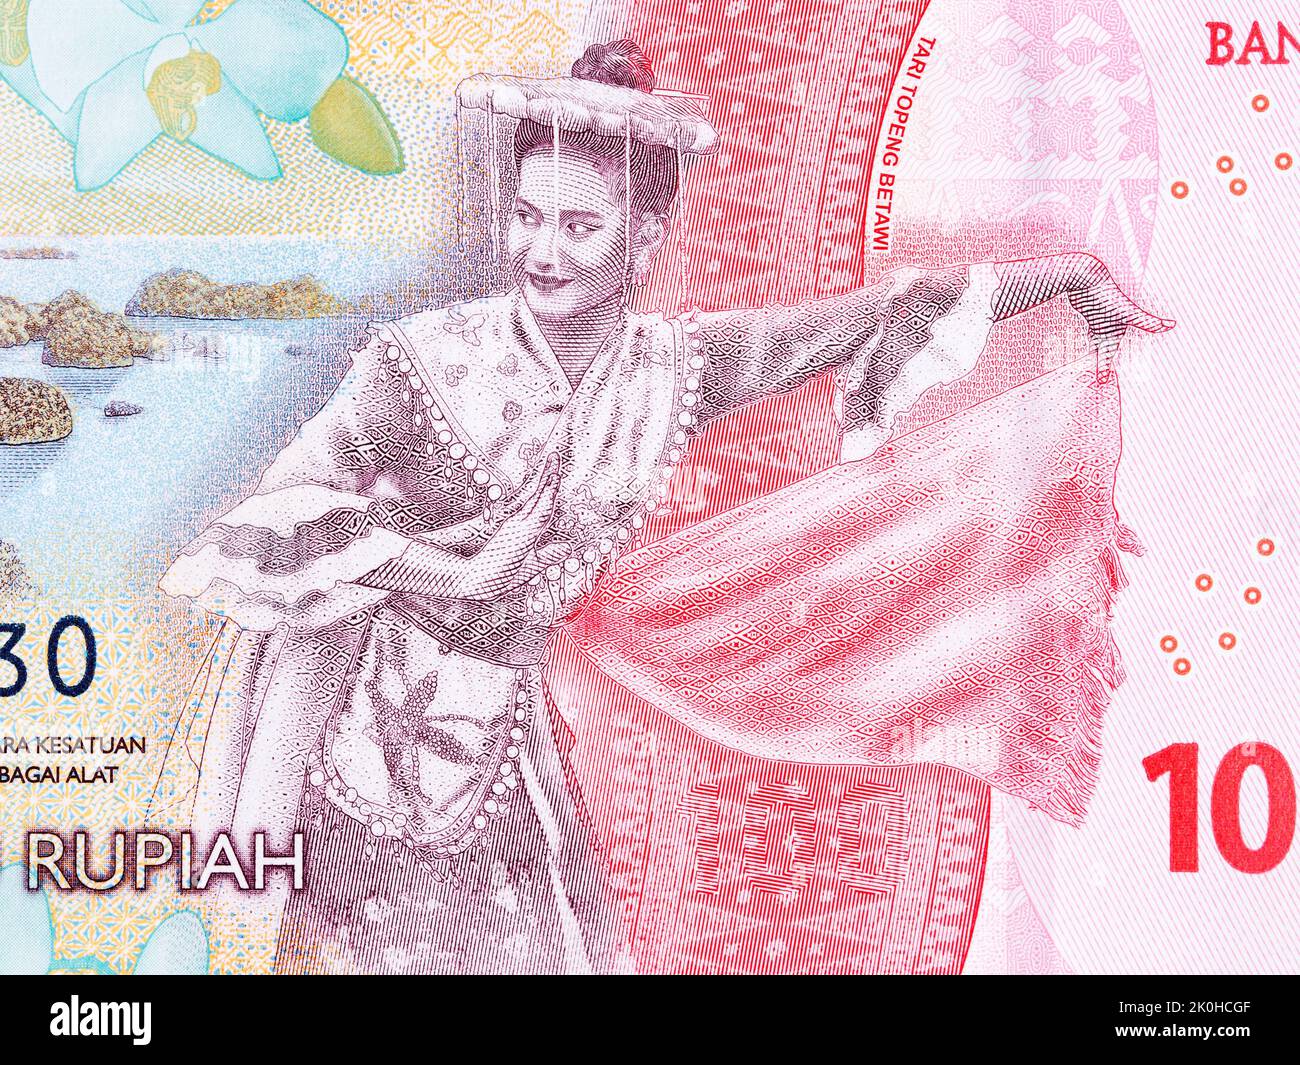 Topeng Betawi dance from Indonesian money - Rupiah Stock Photo